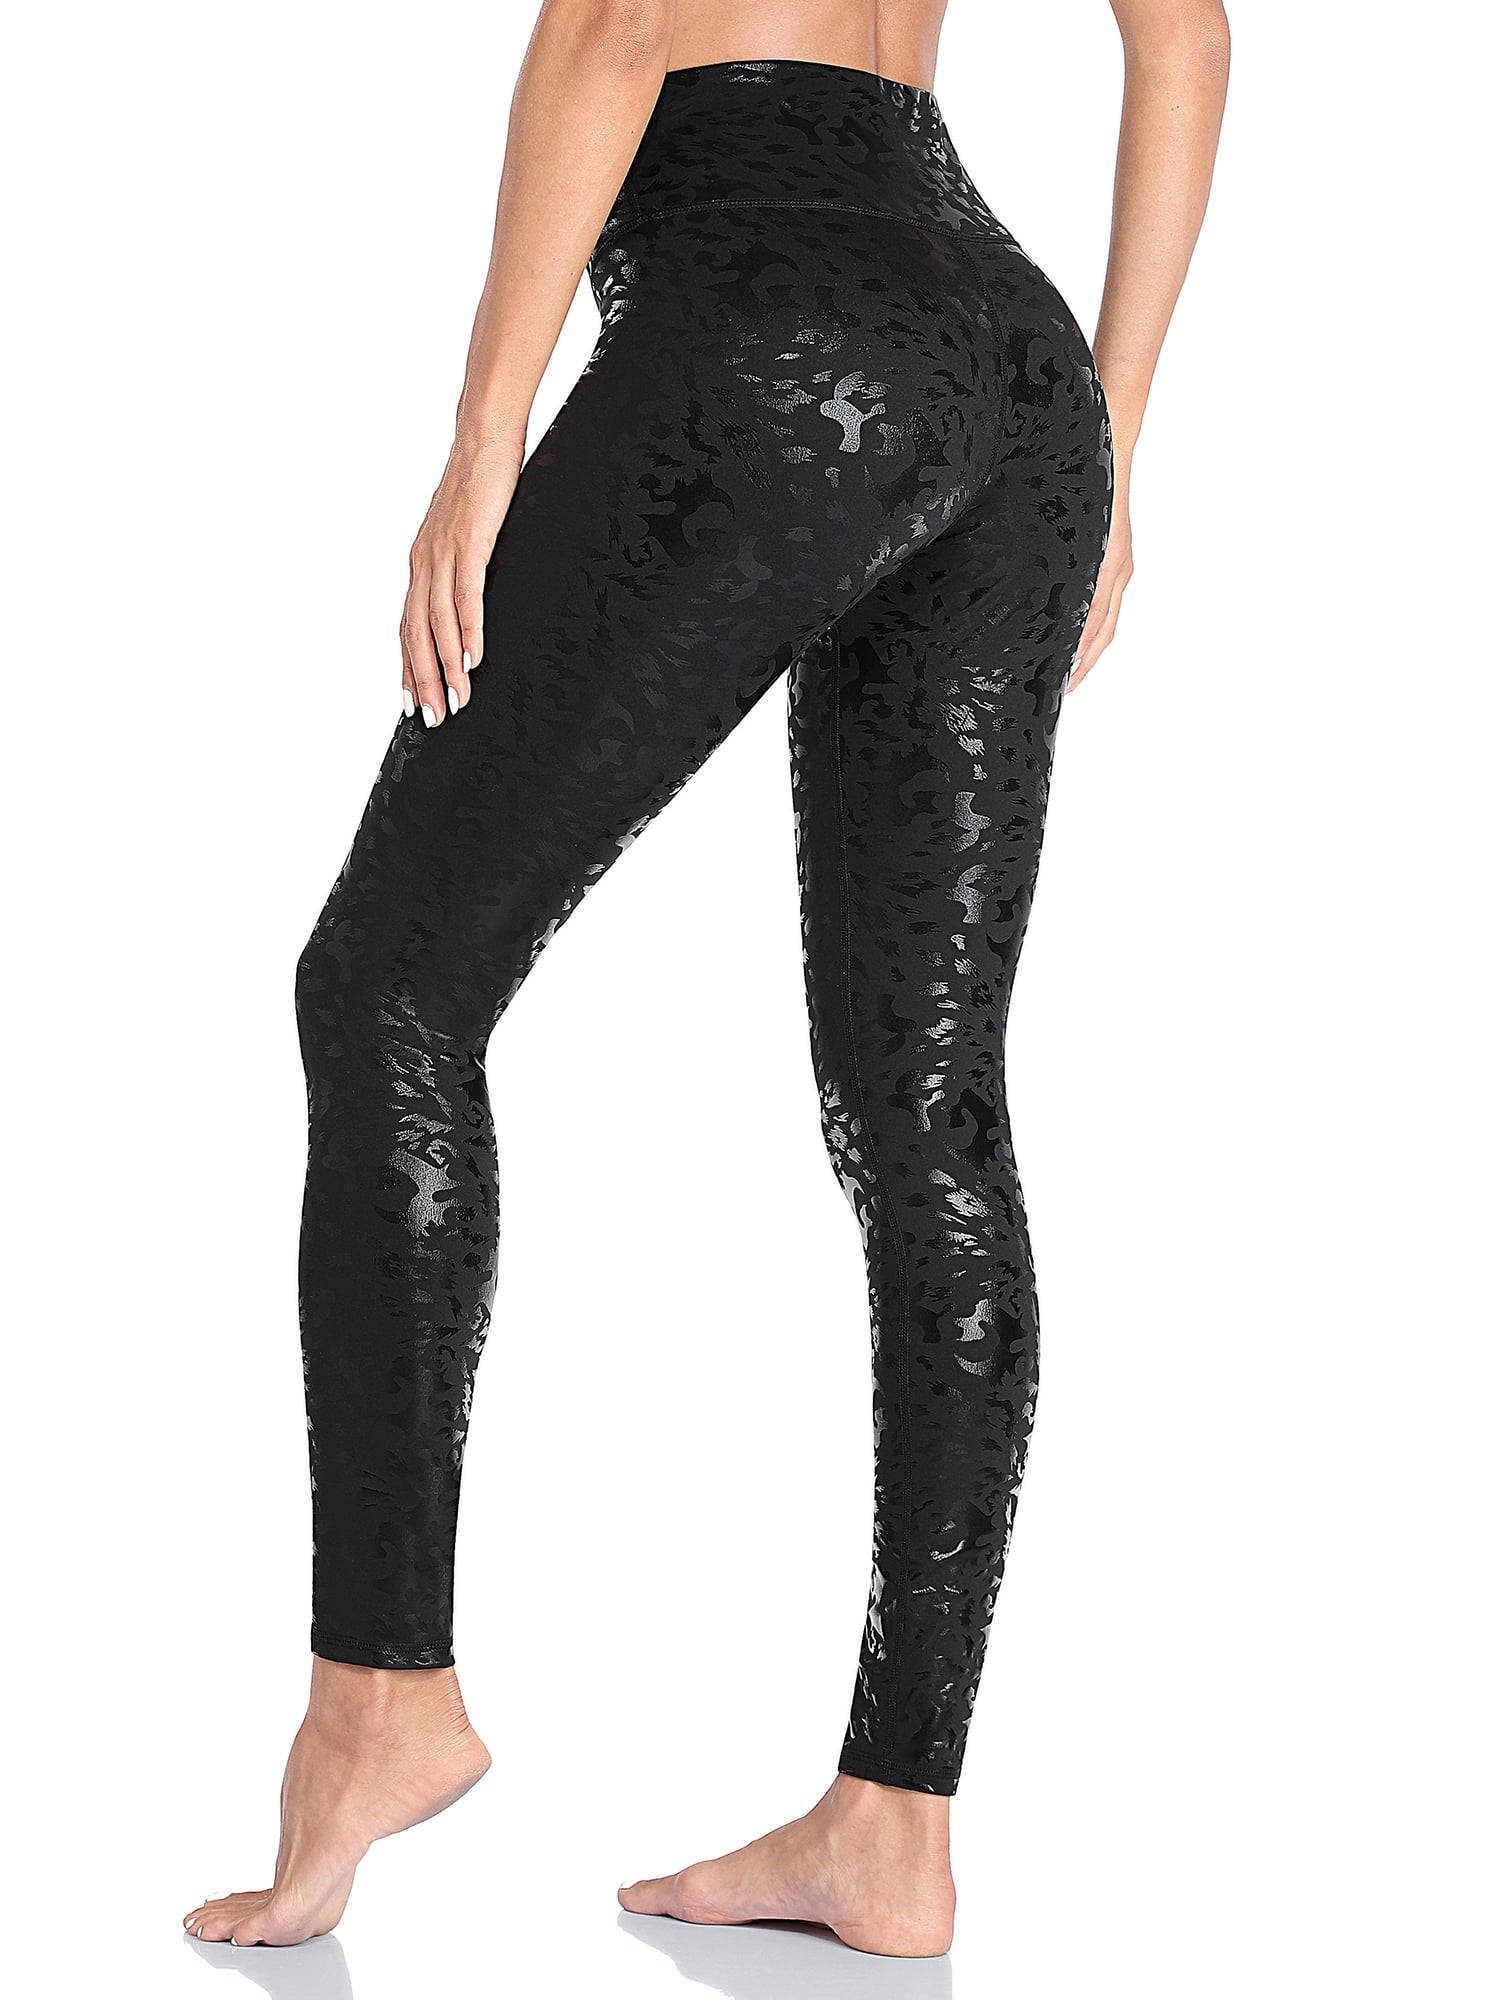 Laiseng Thermal Leggings Synthetic Leather Women High Waistband